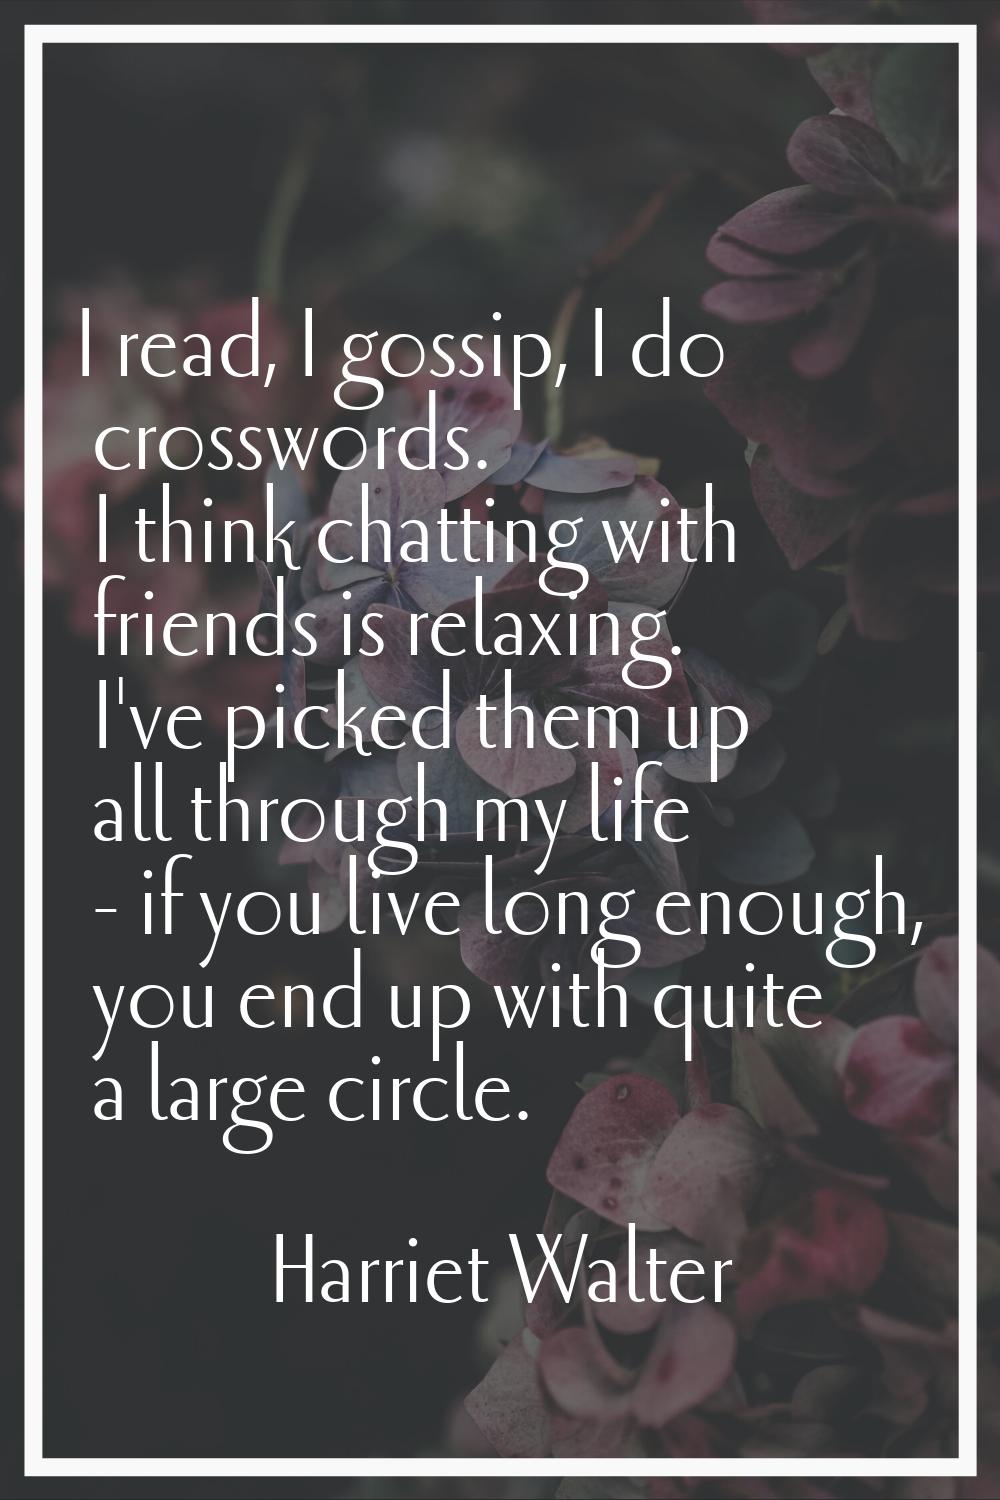 I read, I gossip, I do crosswords. I think chatting with friends is relaxing. I've picked them up a